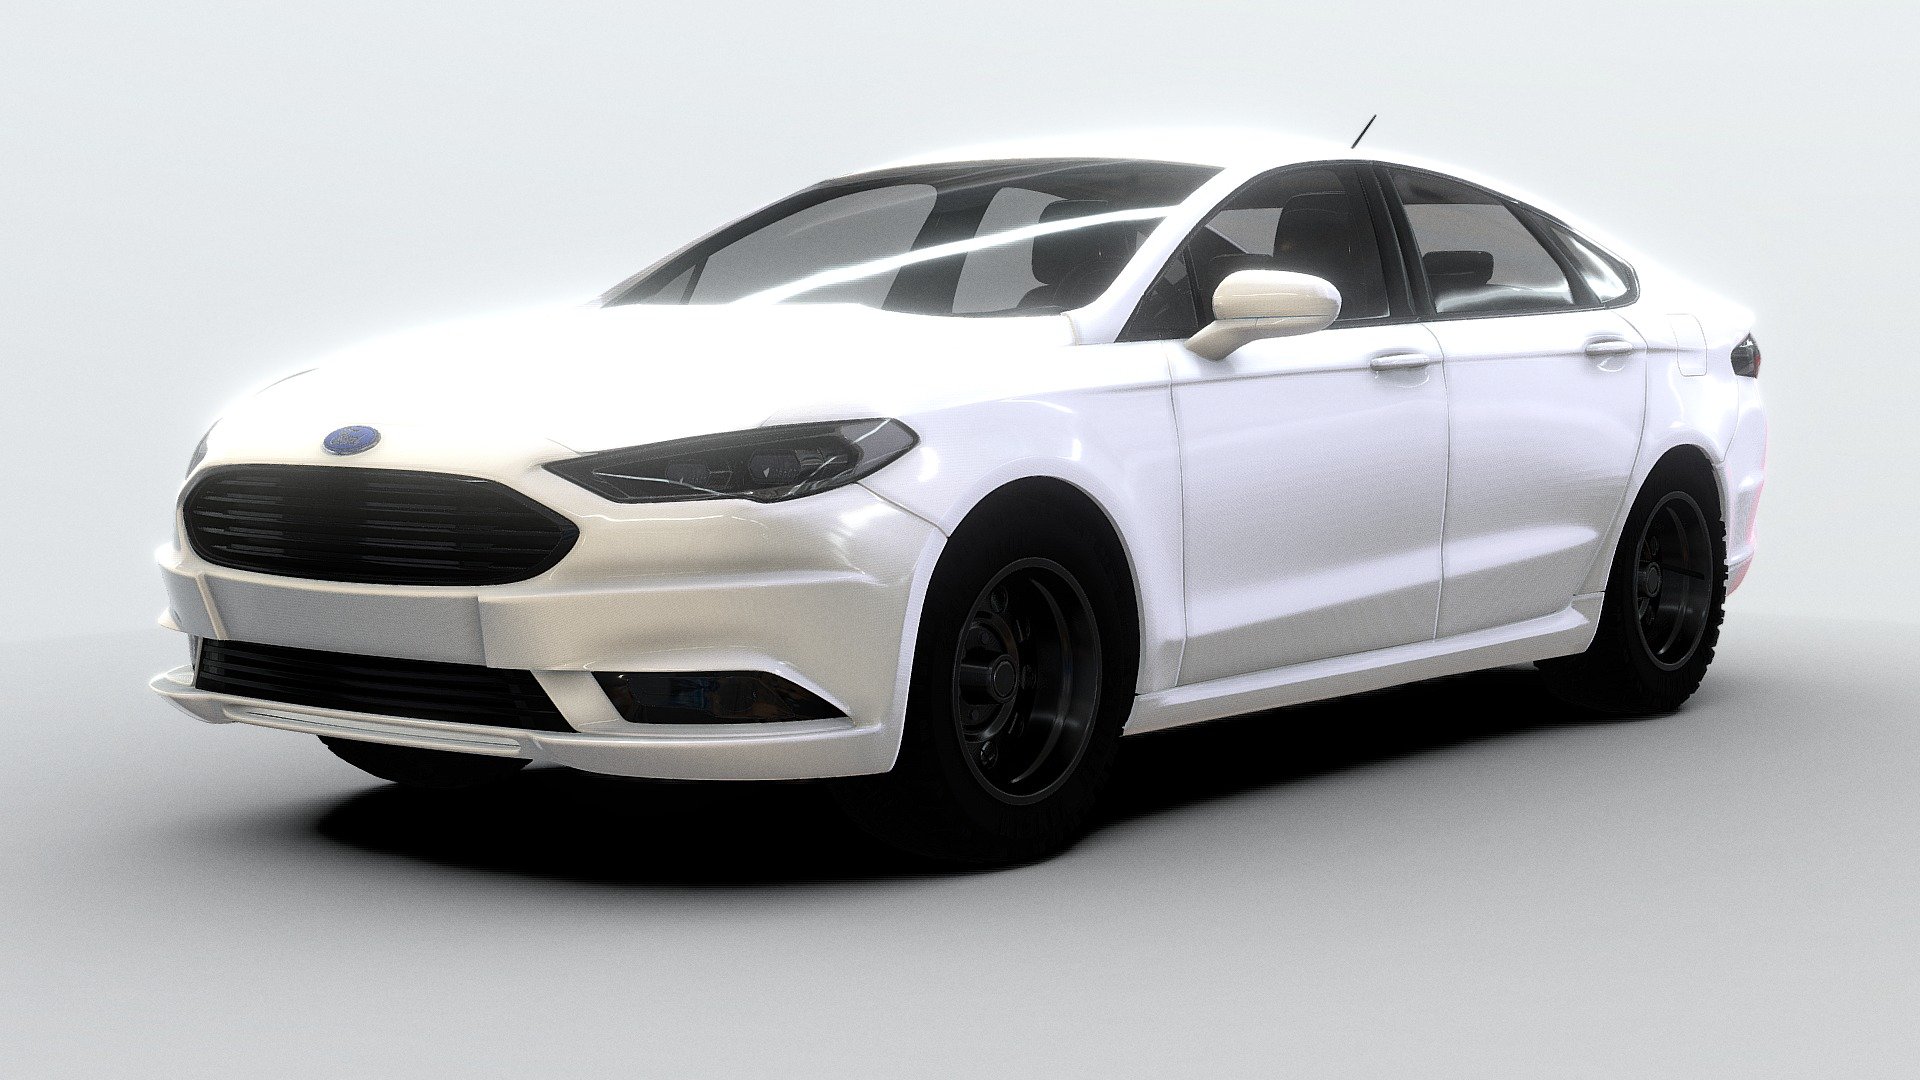 If you want to download this model, please like this page first ❤️❤️

Ford Fusion 3D Model Today I Back with a new model, this time a SedanCar made in blender…

IG: MPGS.STUDIOS

Hope you like it ^-^

**FREE 3D-MODEL YOUR U :) - Ford Fusion 3D Model (High Quality) - Download Free 3D model by Mpgs.studio3DModels (@mpgs.studio) 3d model